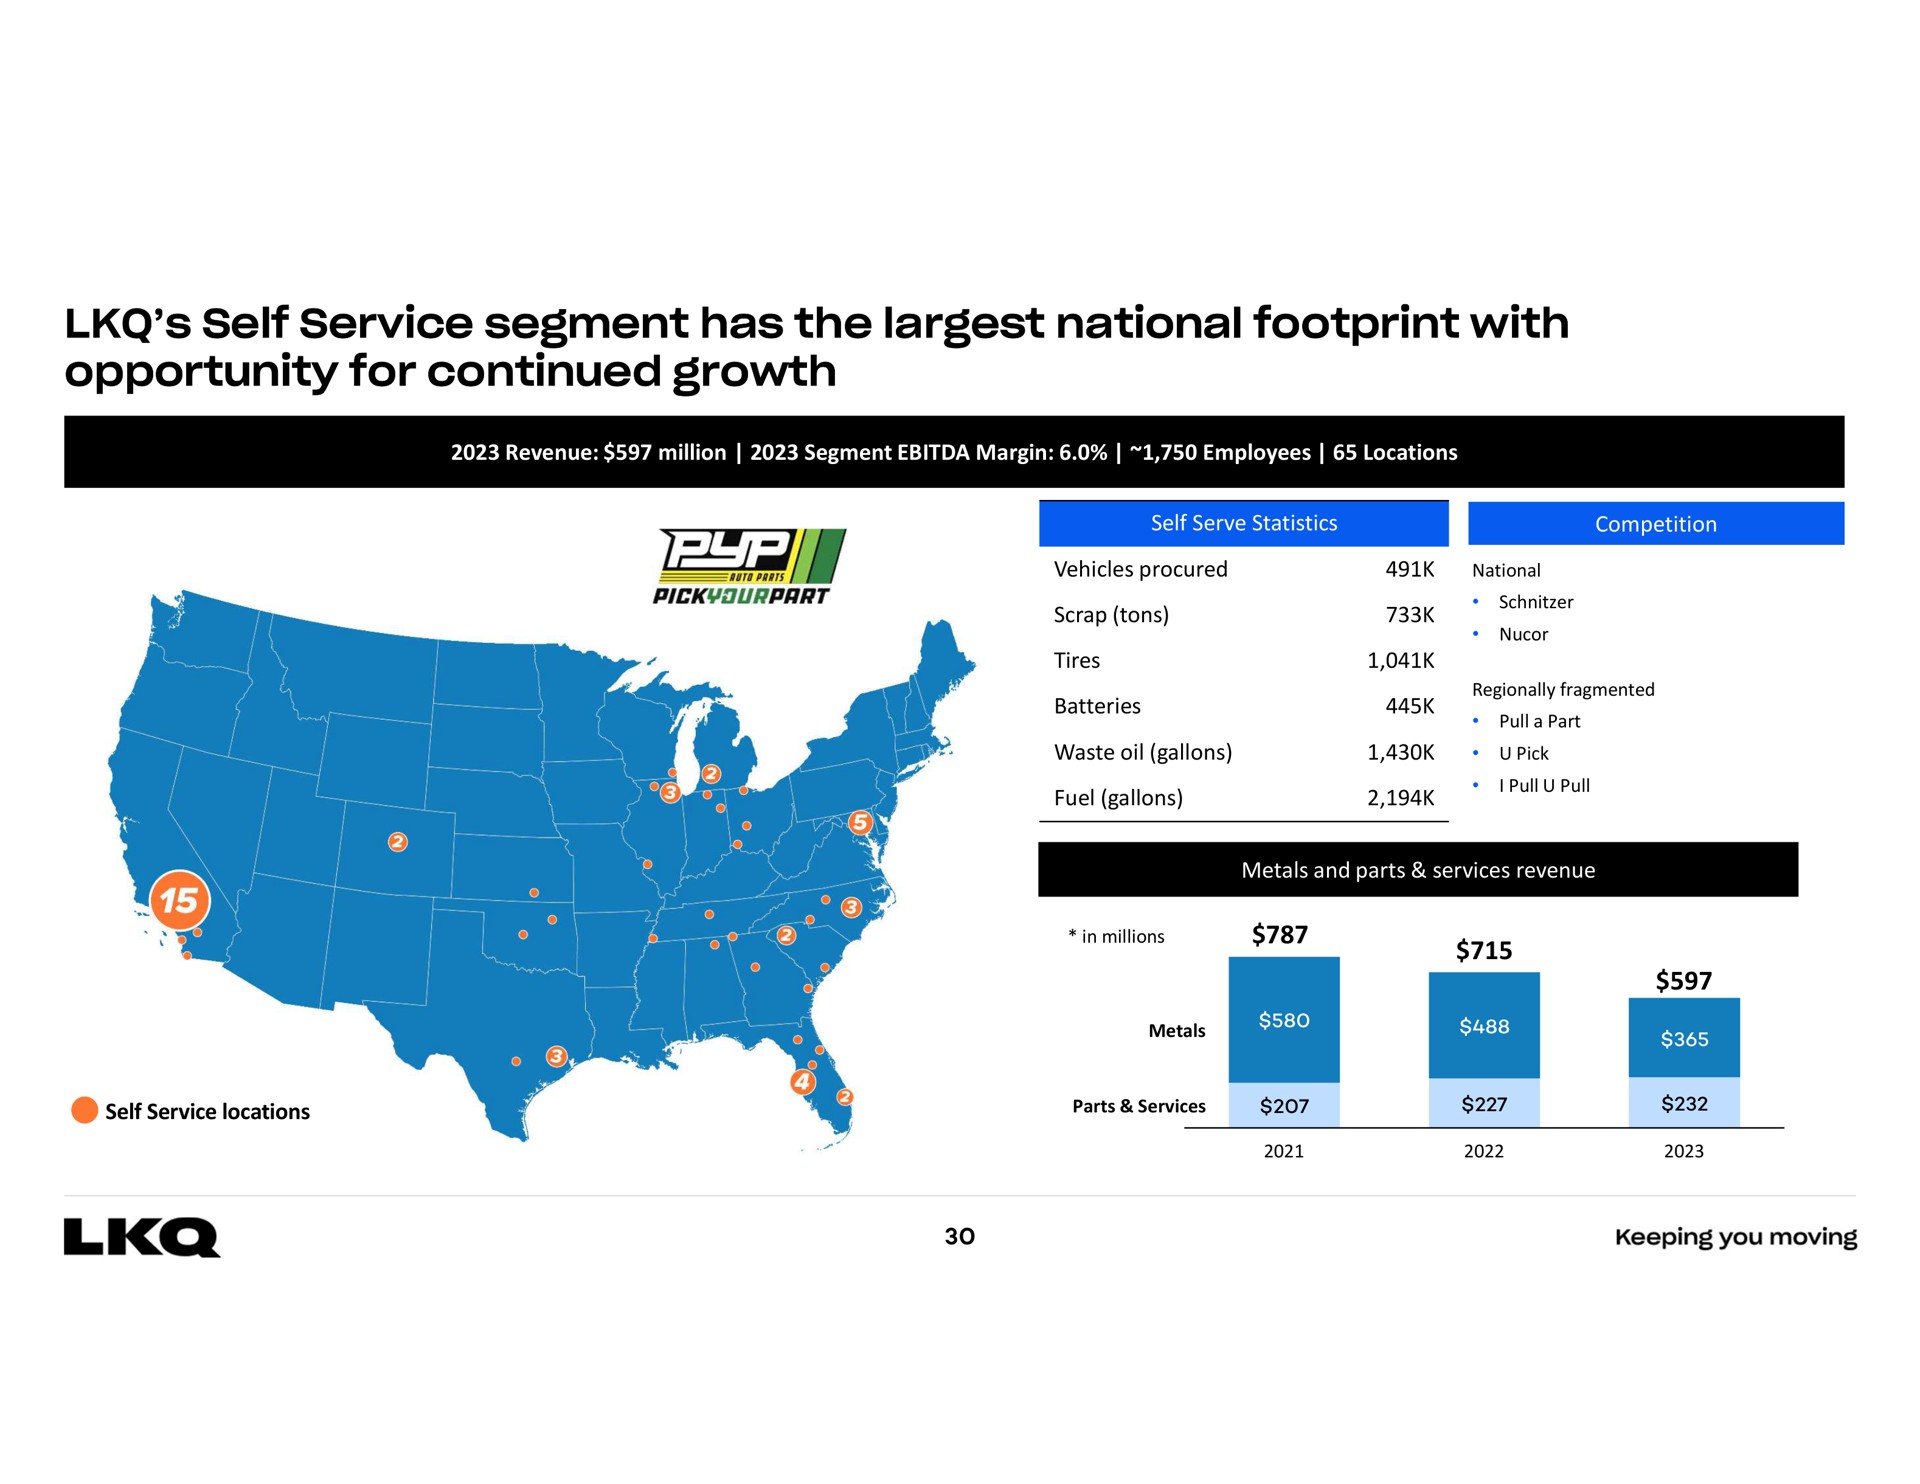 self service segment has the national footprint with opportunity for continued growth sie i | LKQ